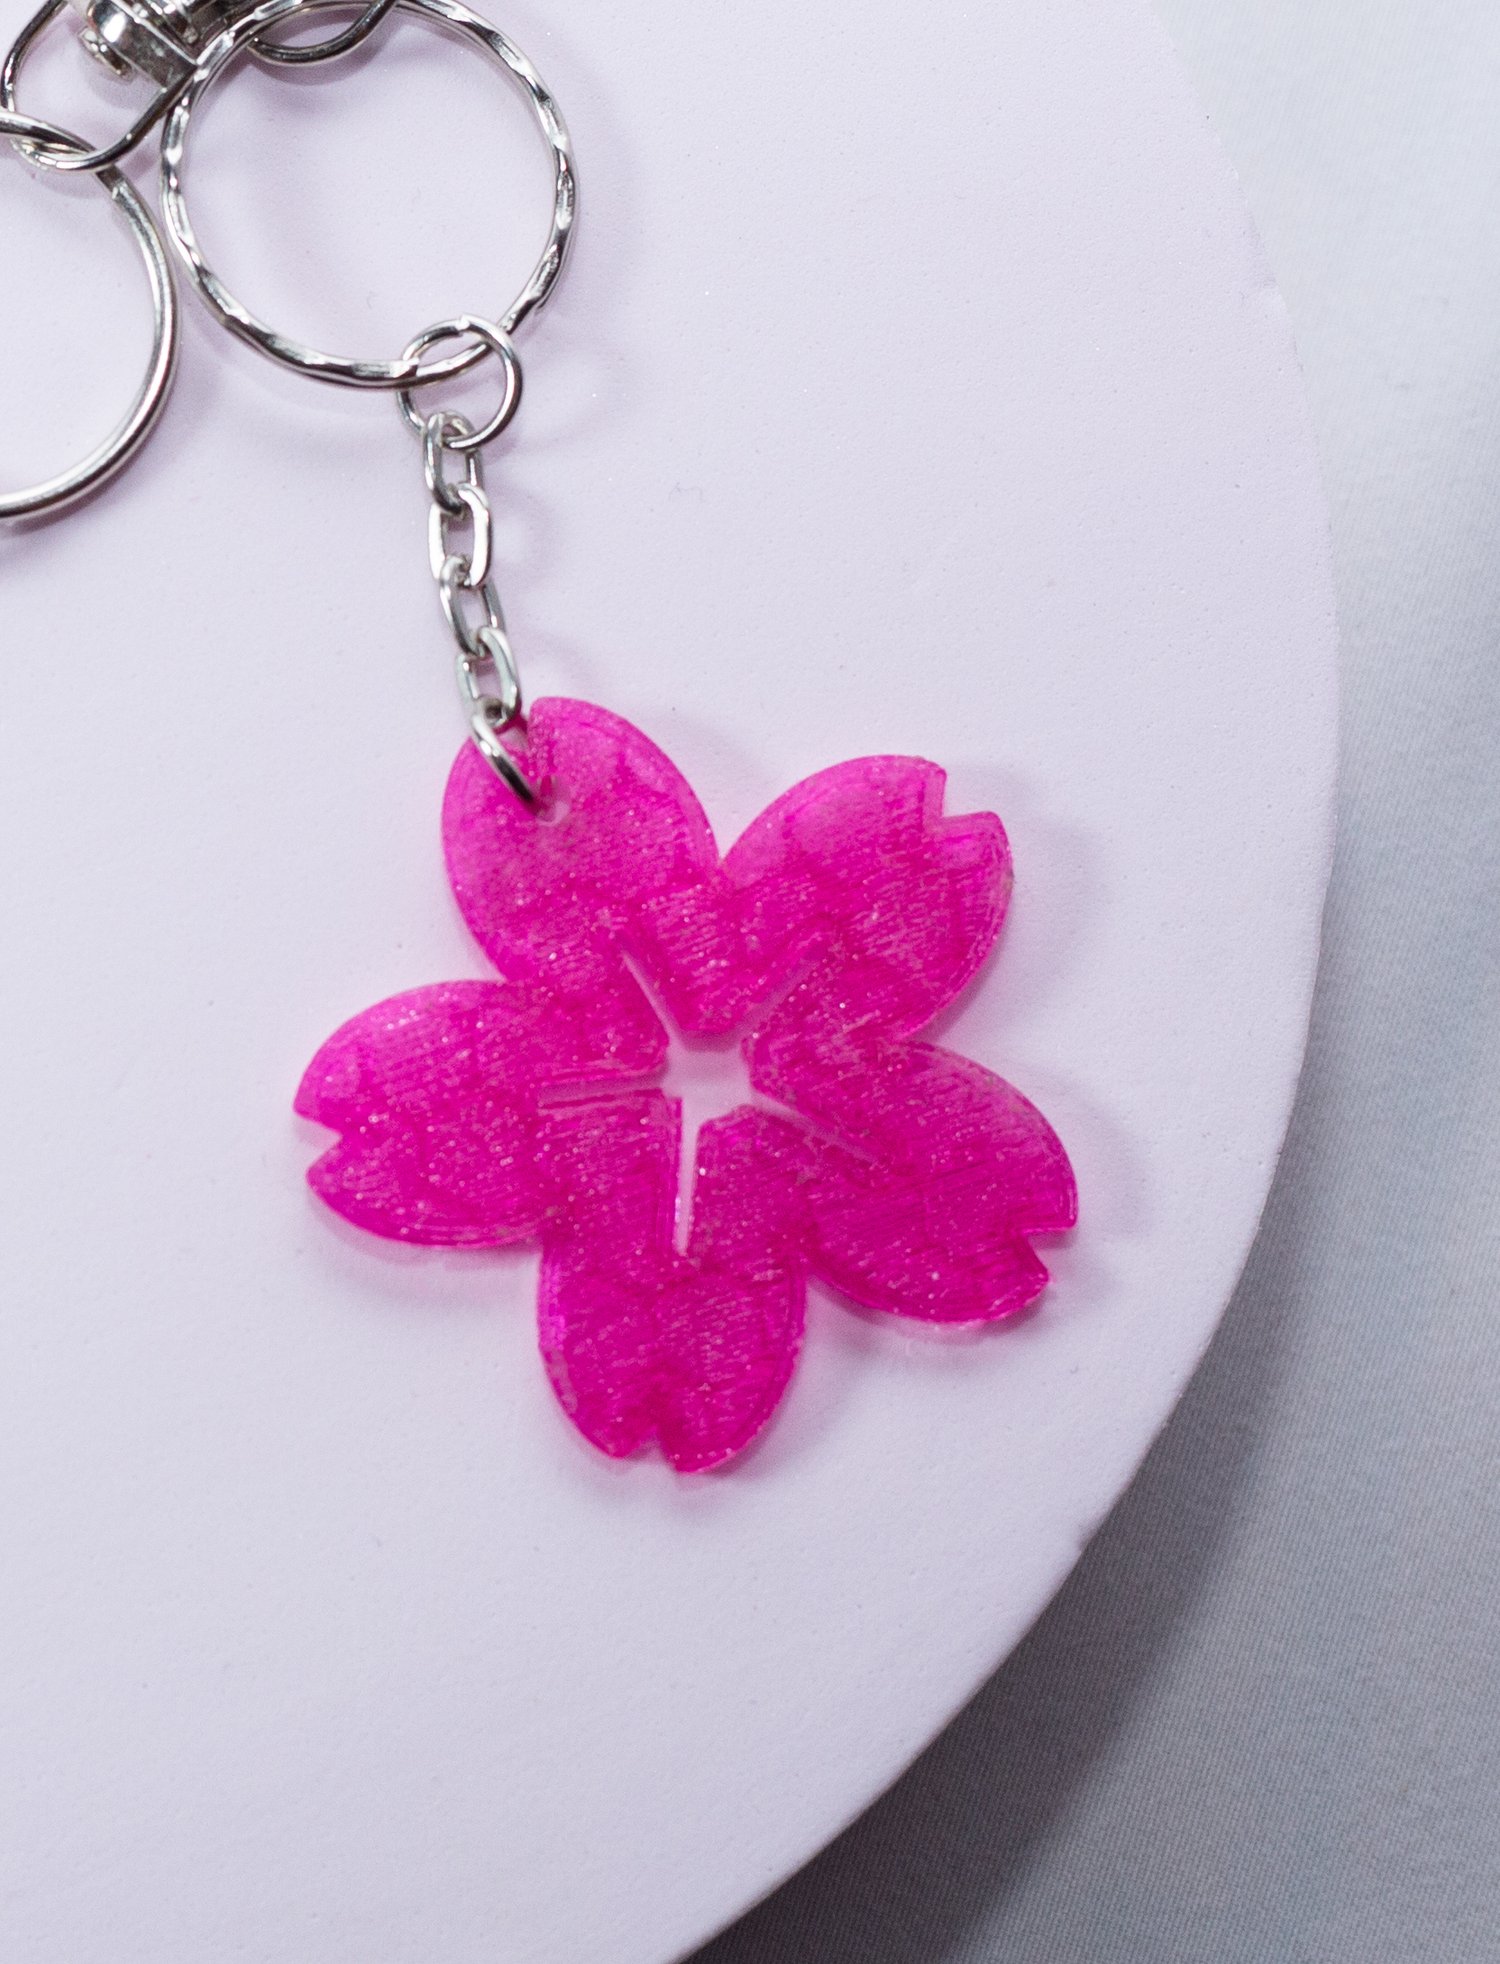 TheCraftinista Cherry Blossom Embroidered Keychain